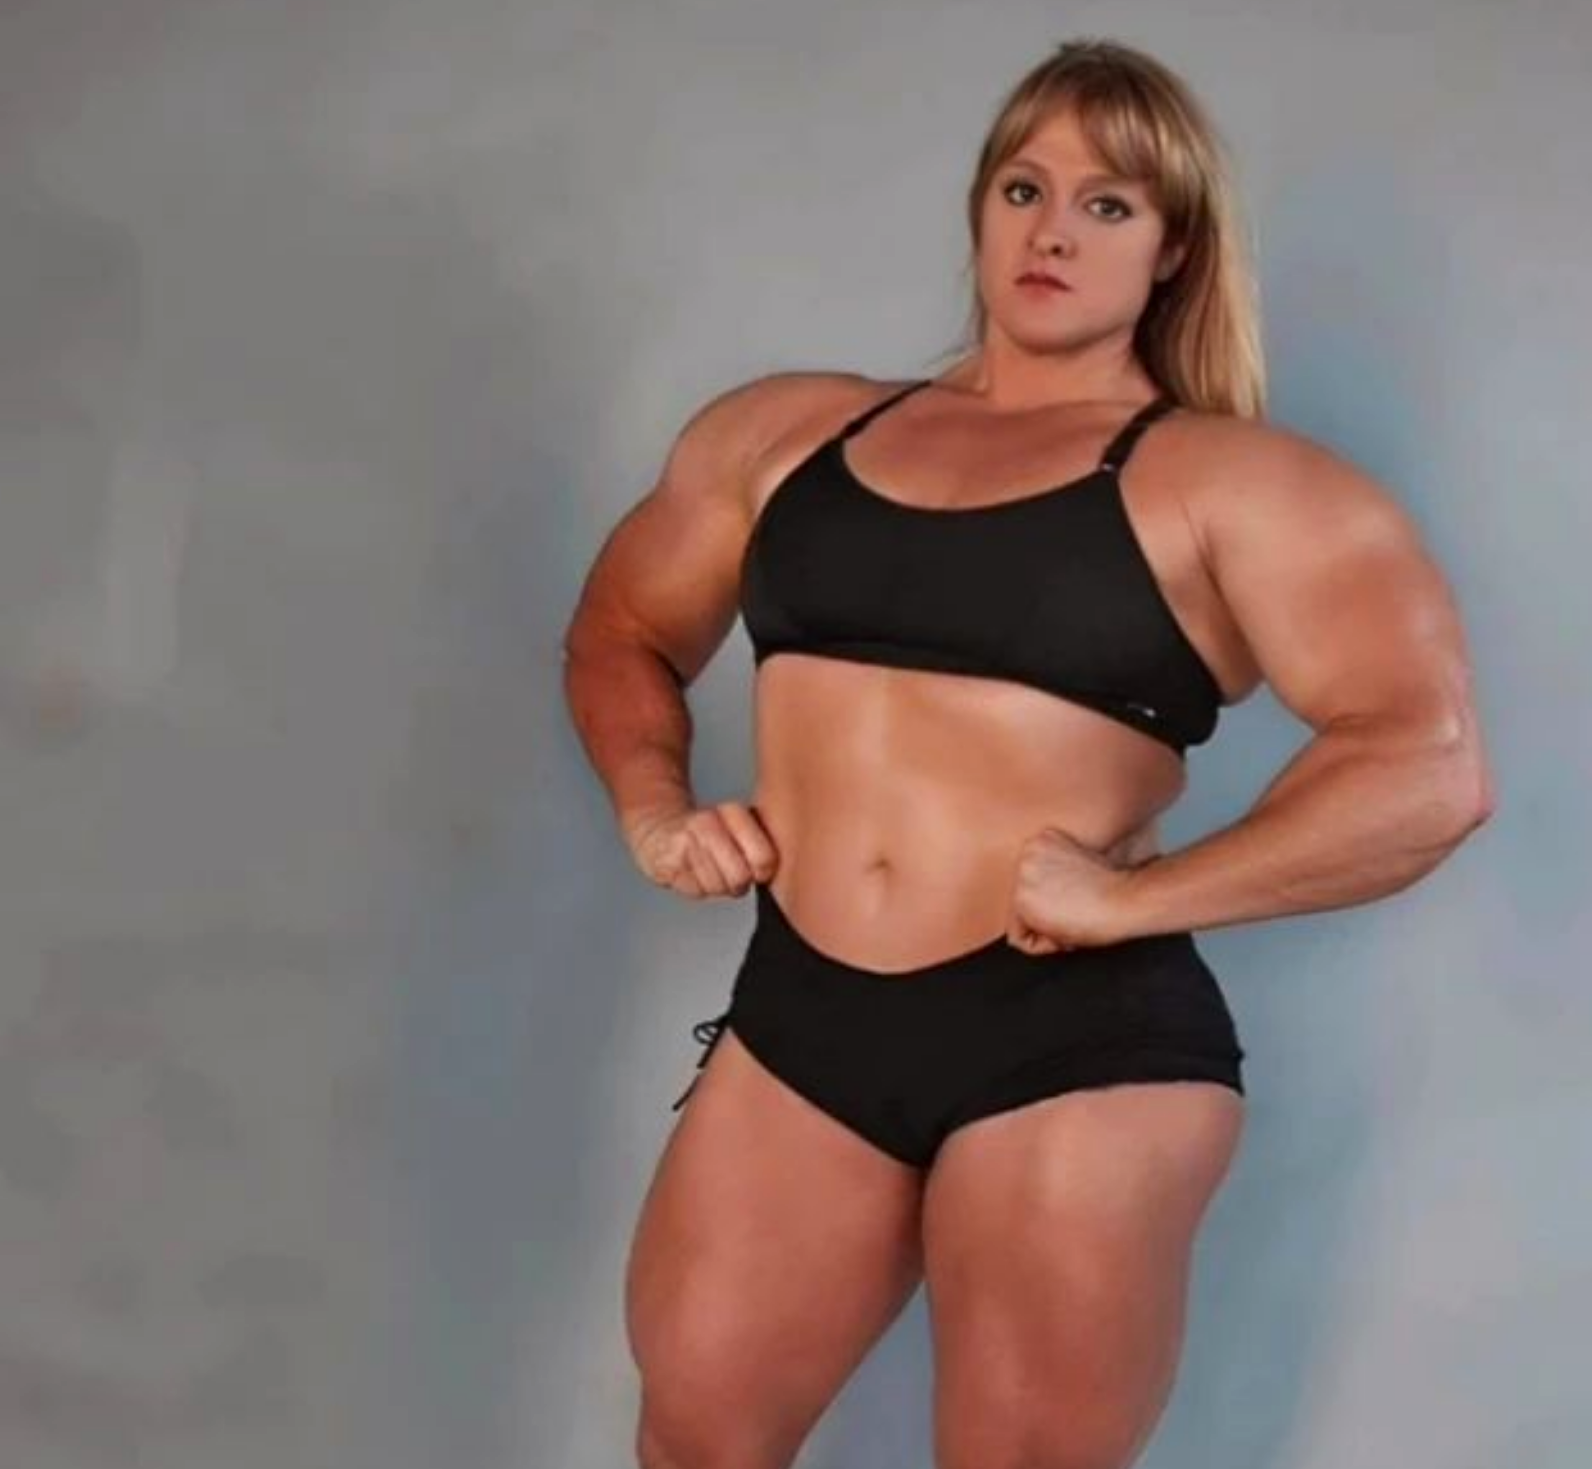 Strongest Woman in the World Ever: Top 10, Ranked by A.I. - The